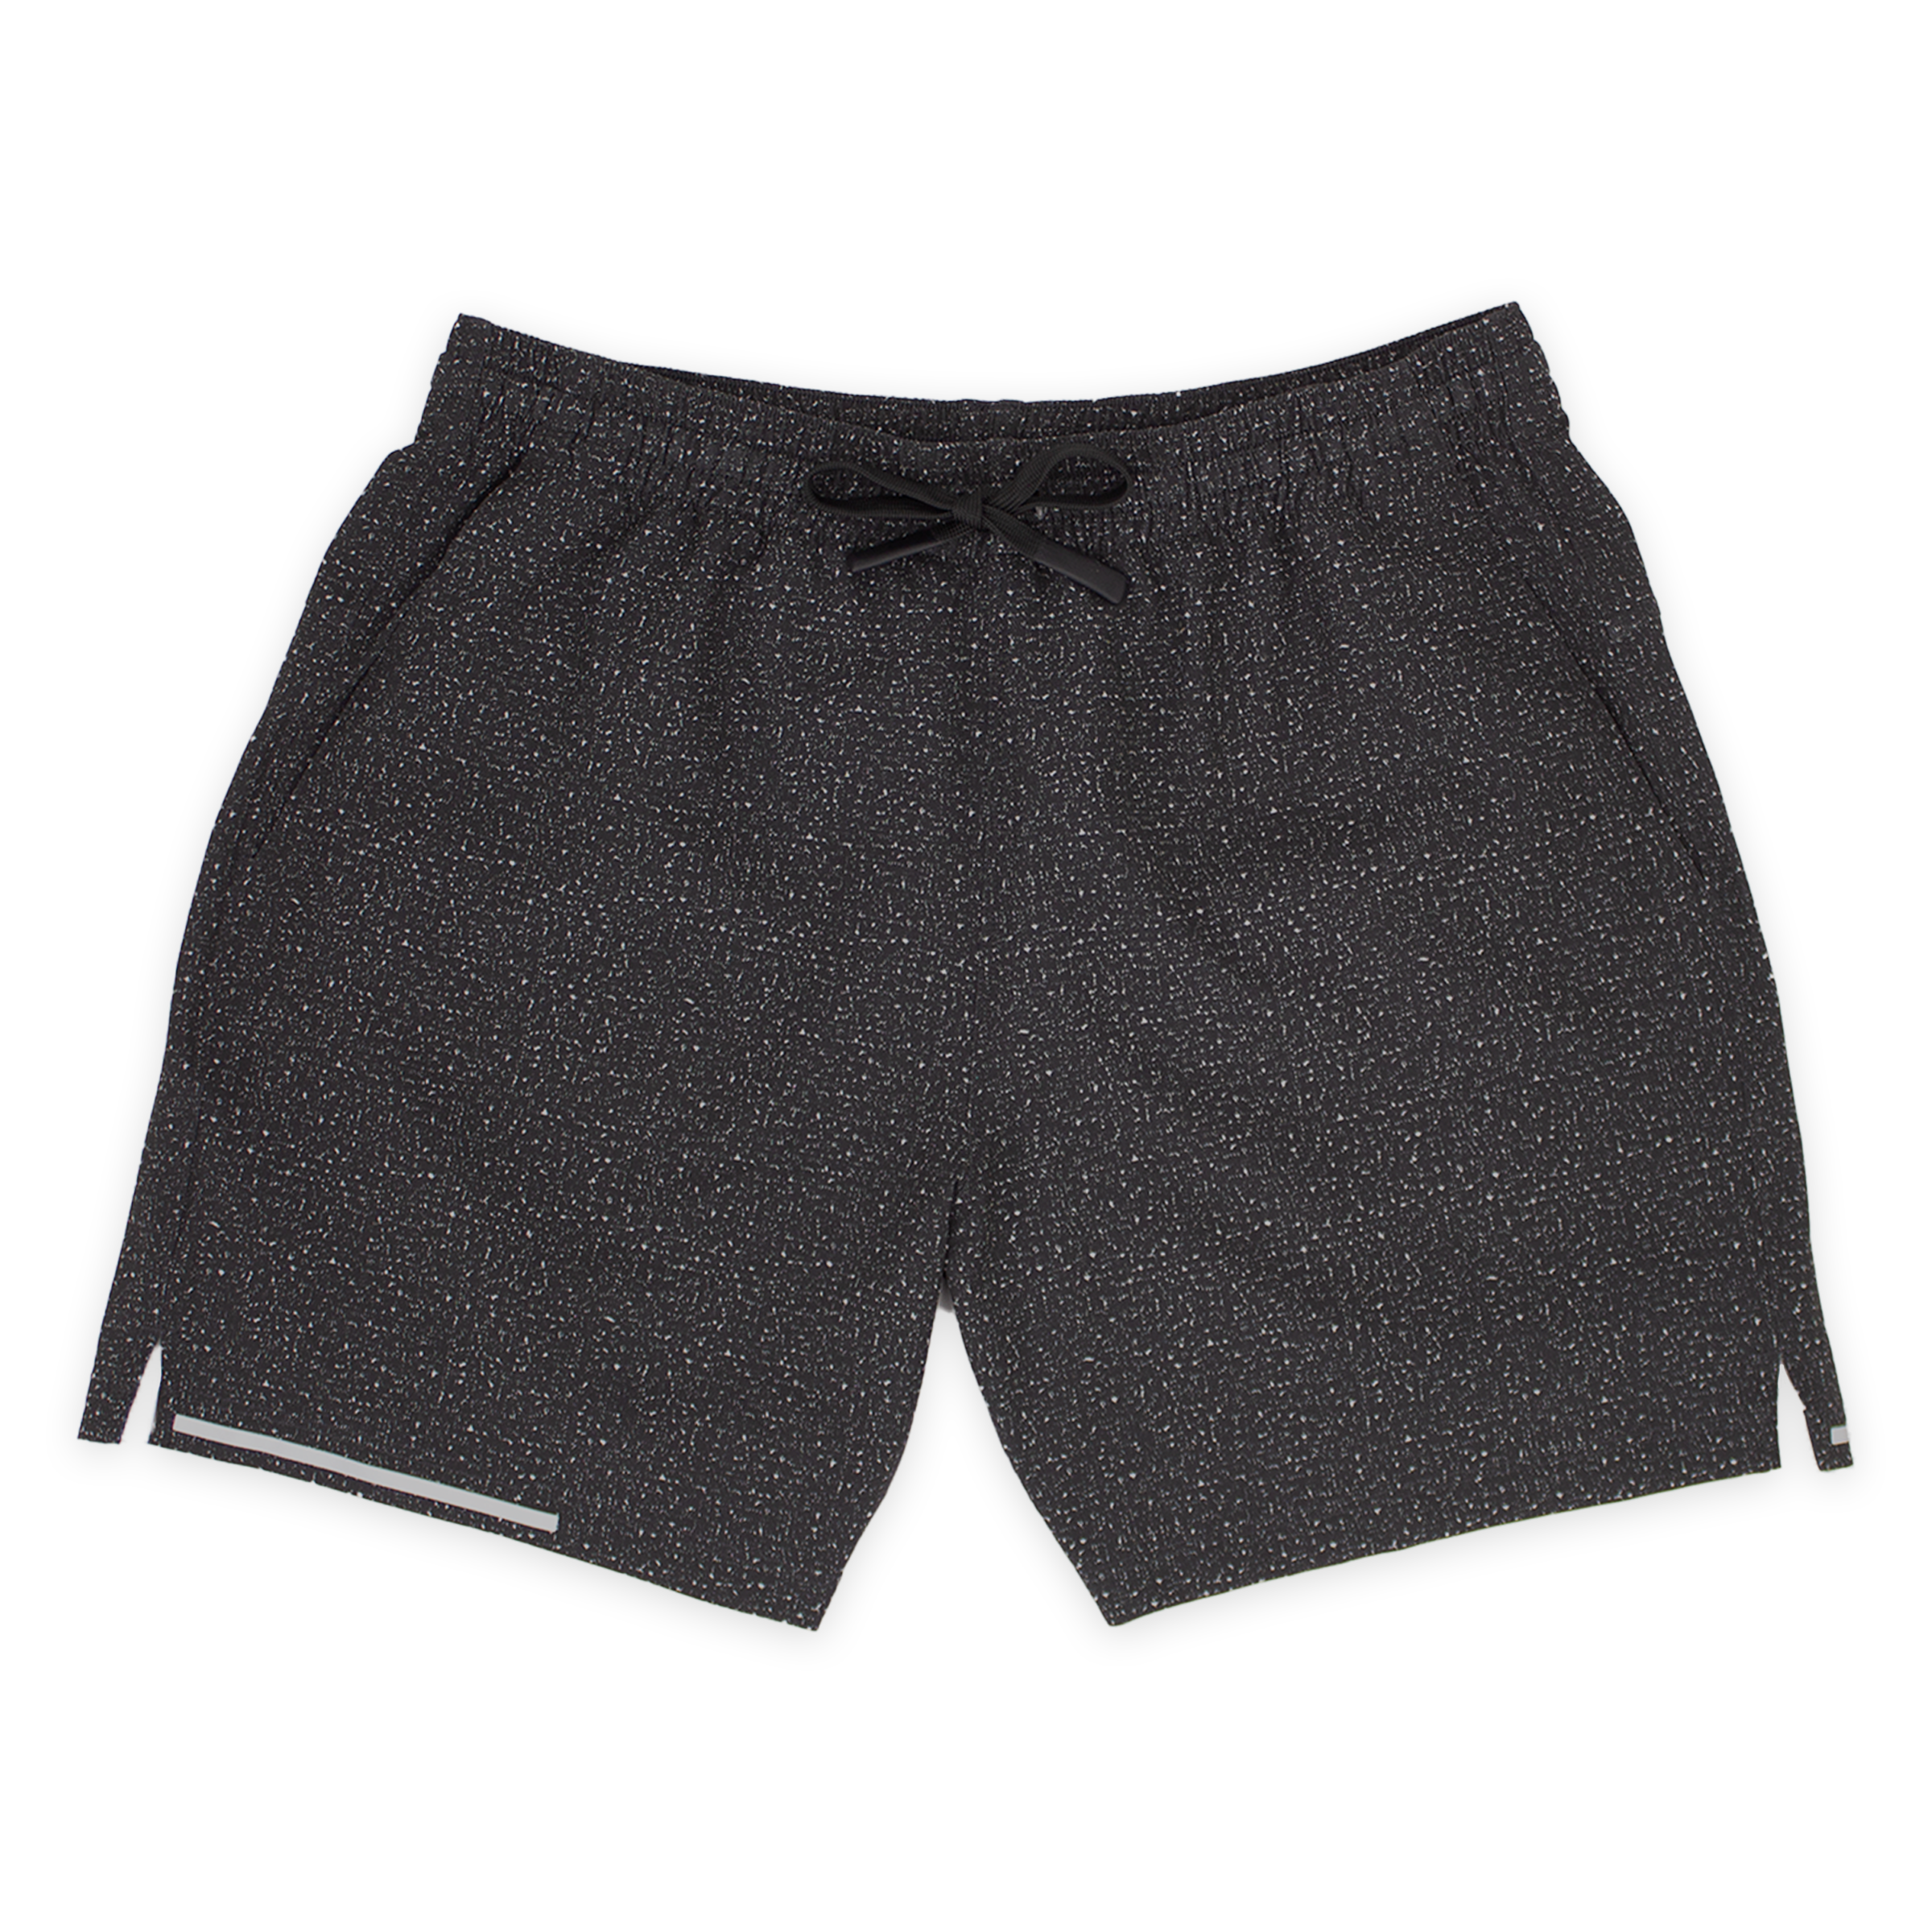 Run Short 5.5" Carbon front with elastic waistband, black drawstring with rubberized tips, two front pockets, split hem, and reflective line on bottom right hem